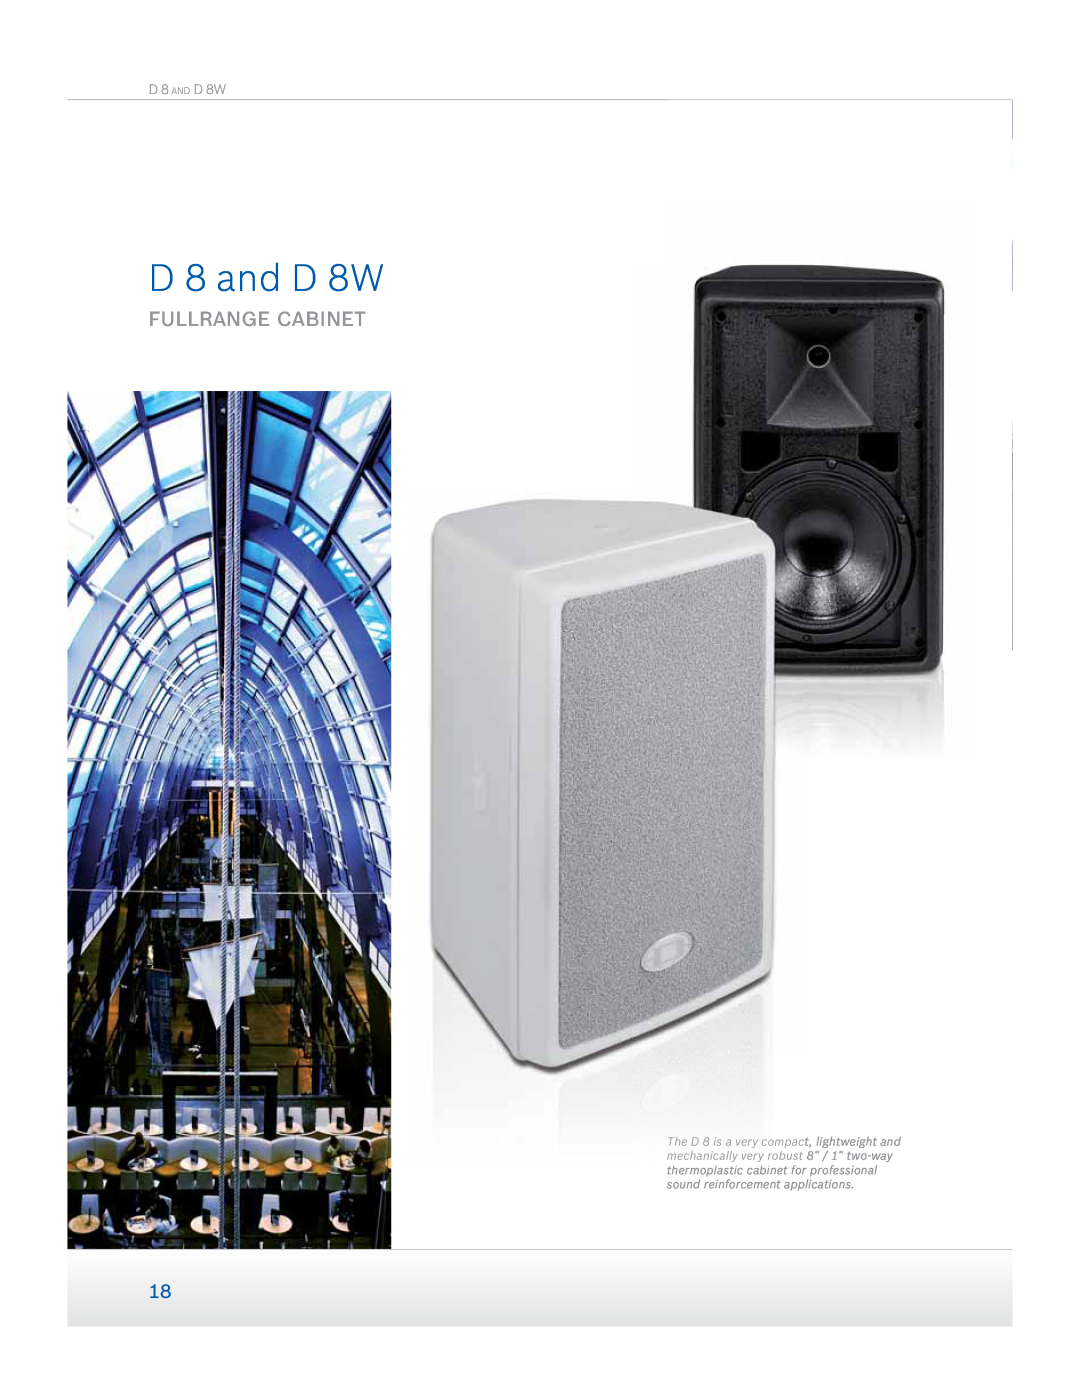 Dynacord Speaker manual D 8 and D 8W, Fullrange Cabinet, D 8 AND D 8W 